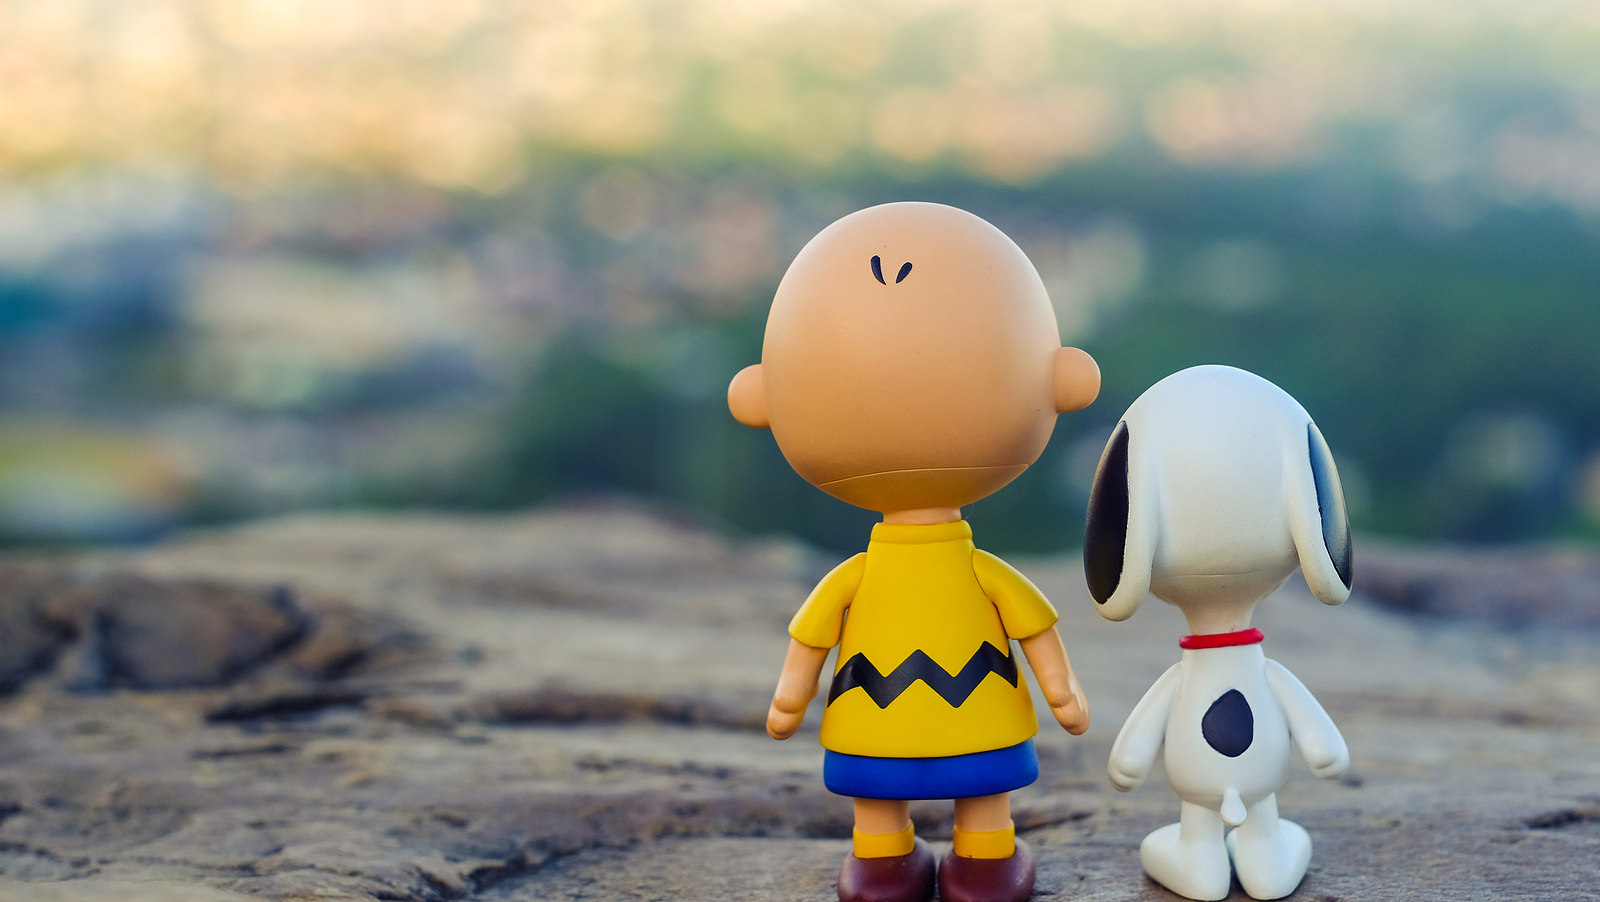 What Do Medicare and Charlie Brown Have in Common?